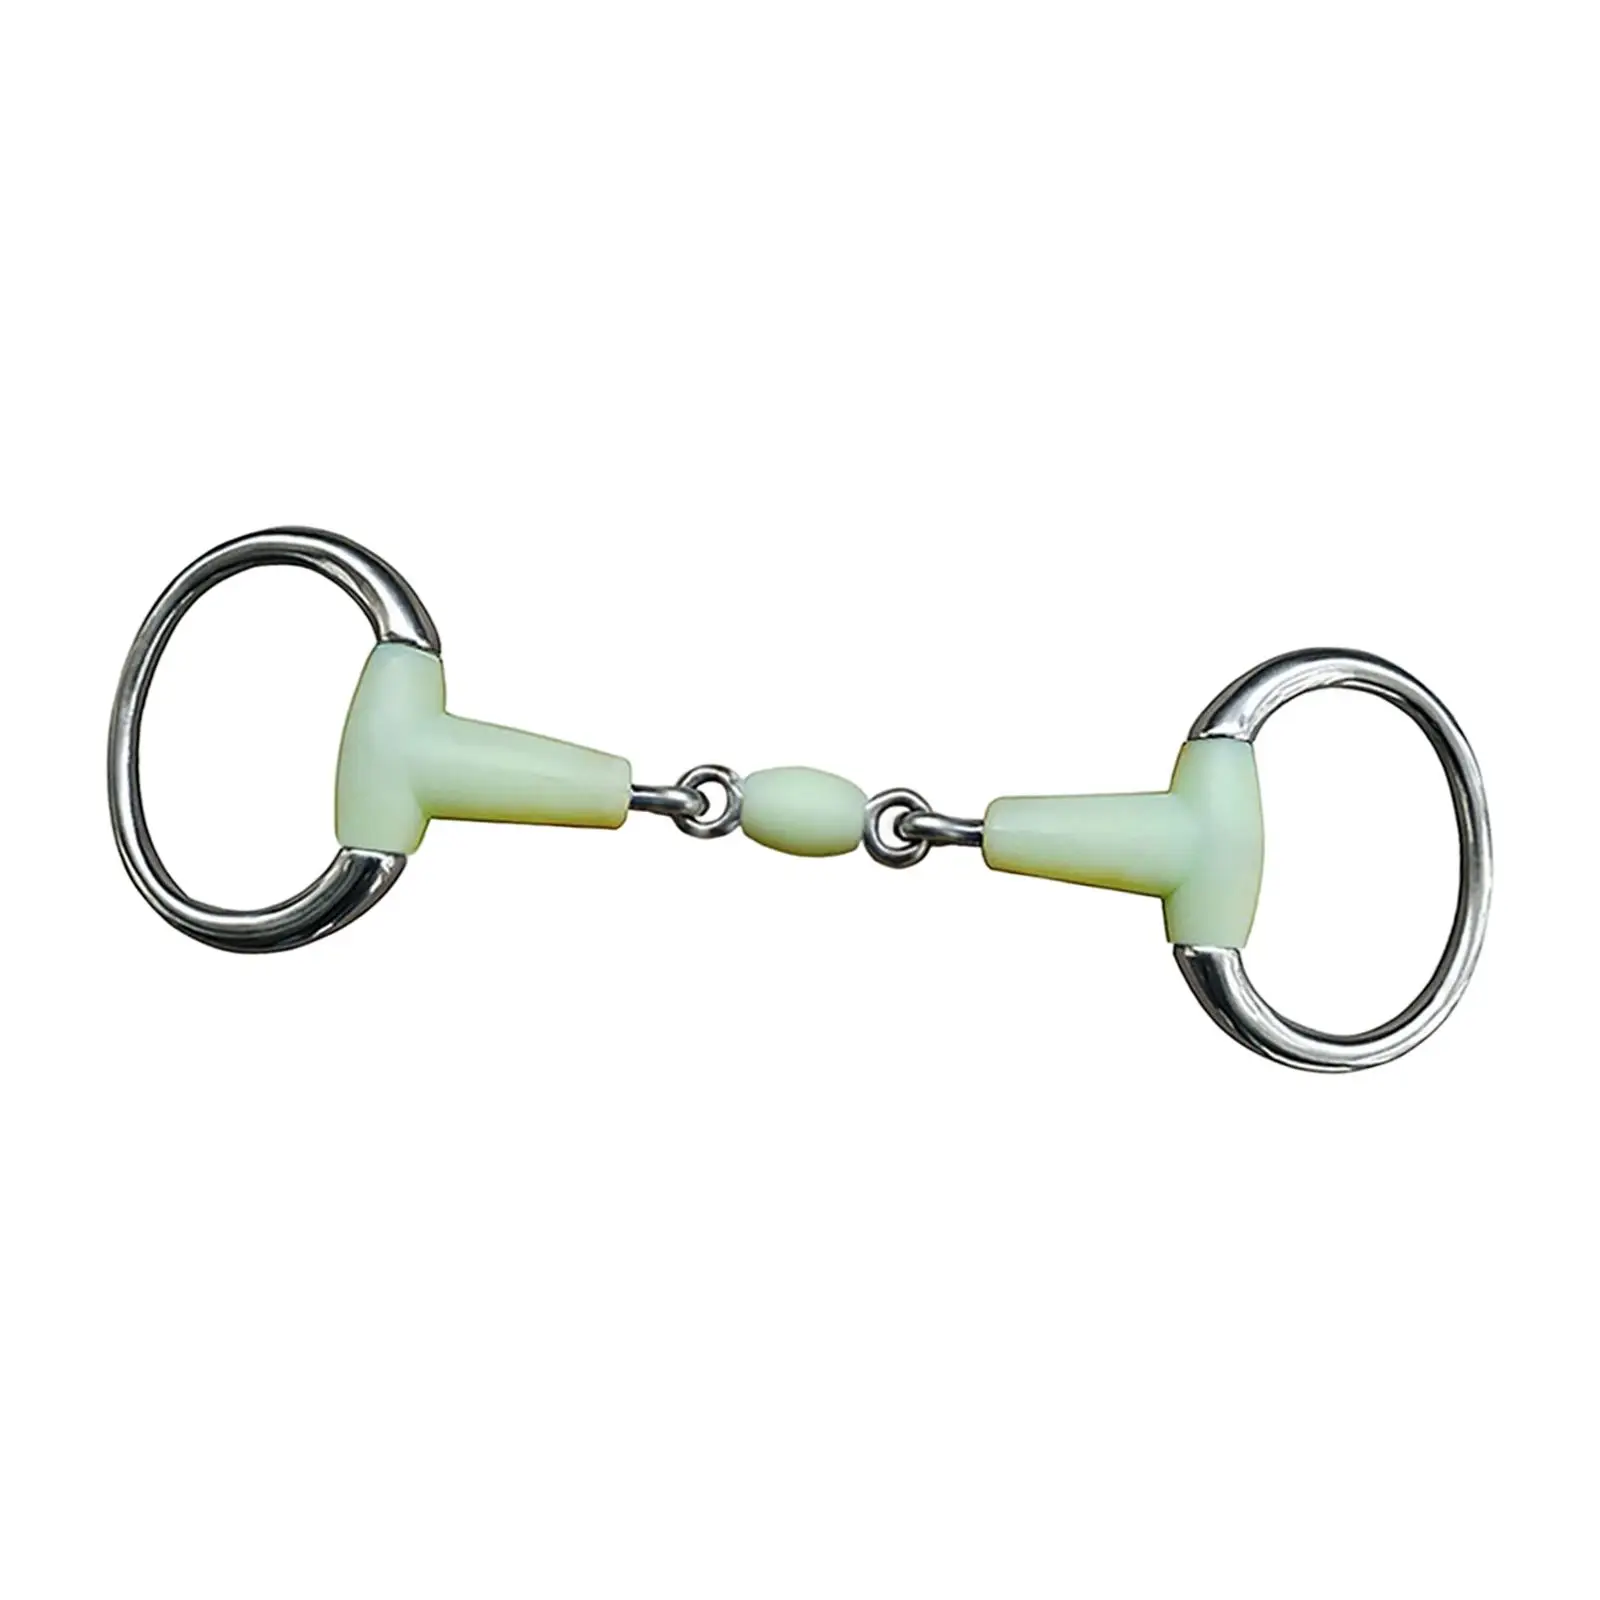 Ultralight Horse Bit Mouth, Horse Training Snaffle Tool, for Outdoor Horse Riding Equipment Supplies